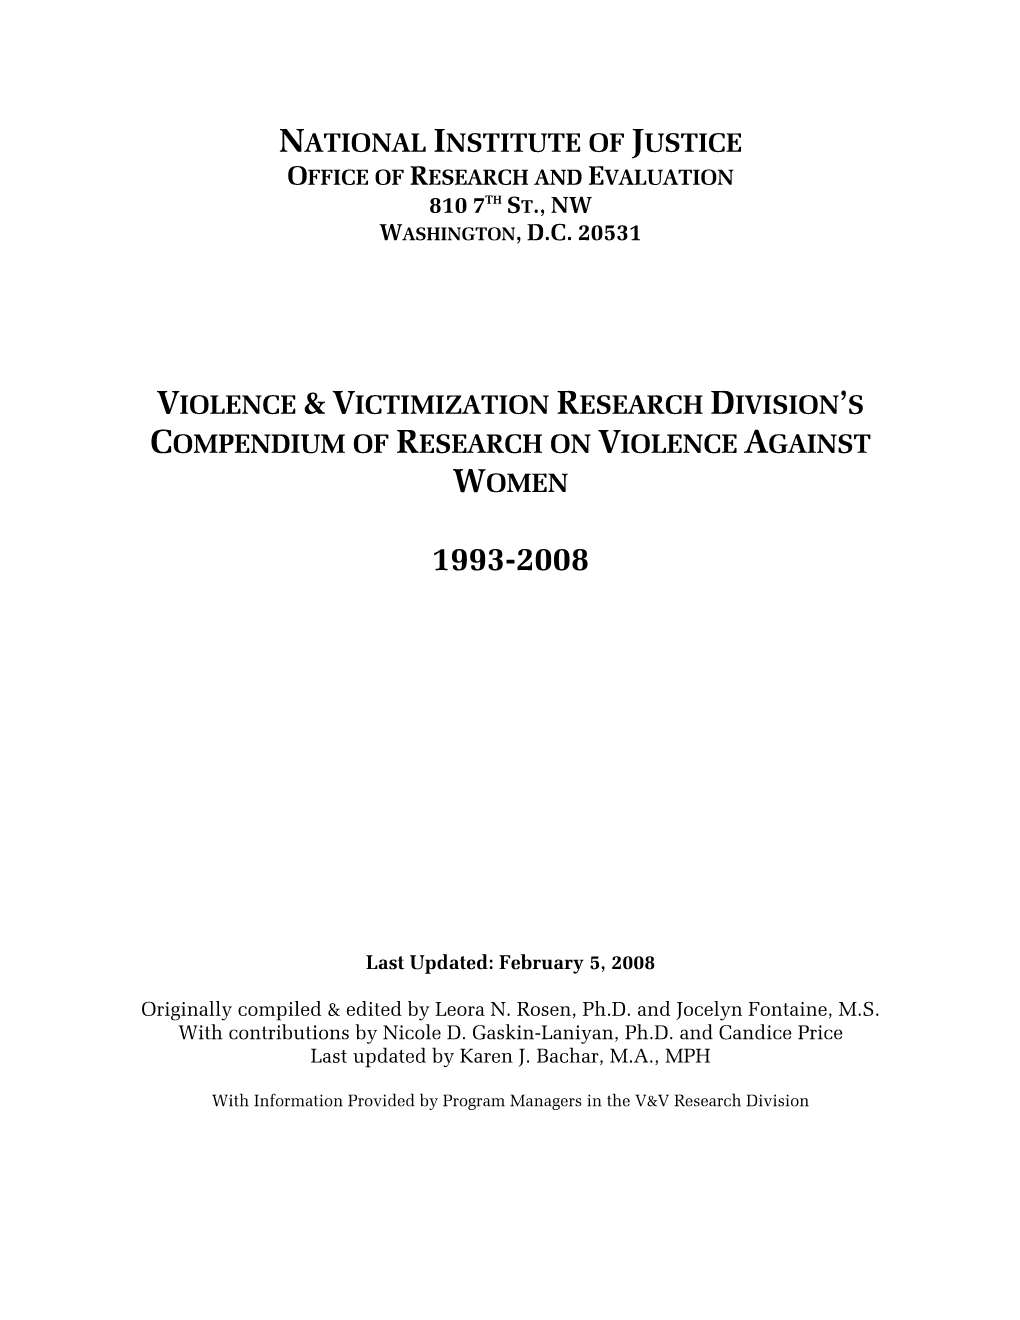 National Institute of Justice Compendium of Research on Violence Against Women 1993